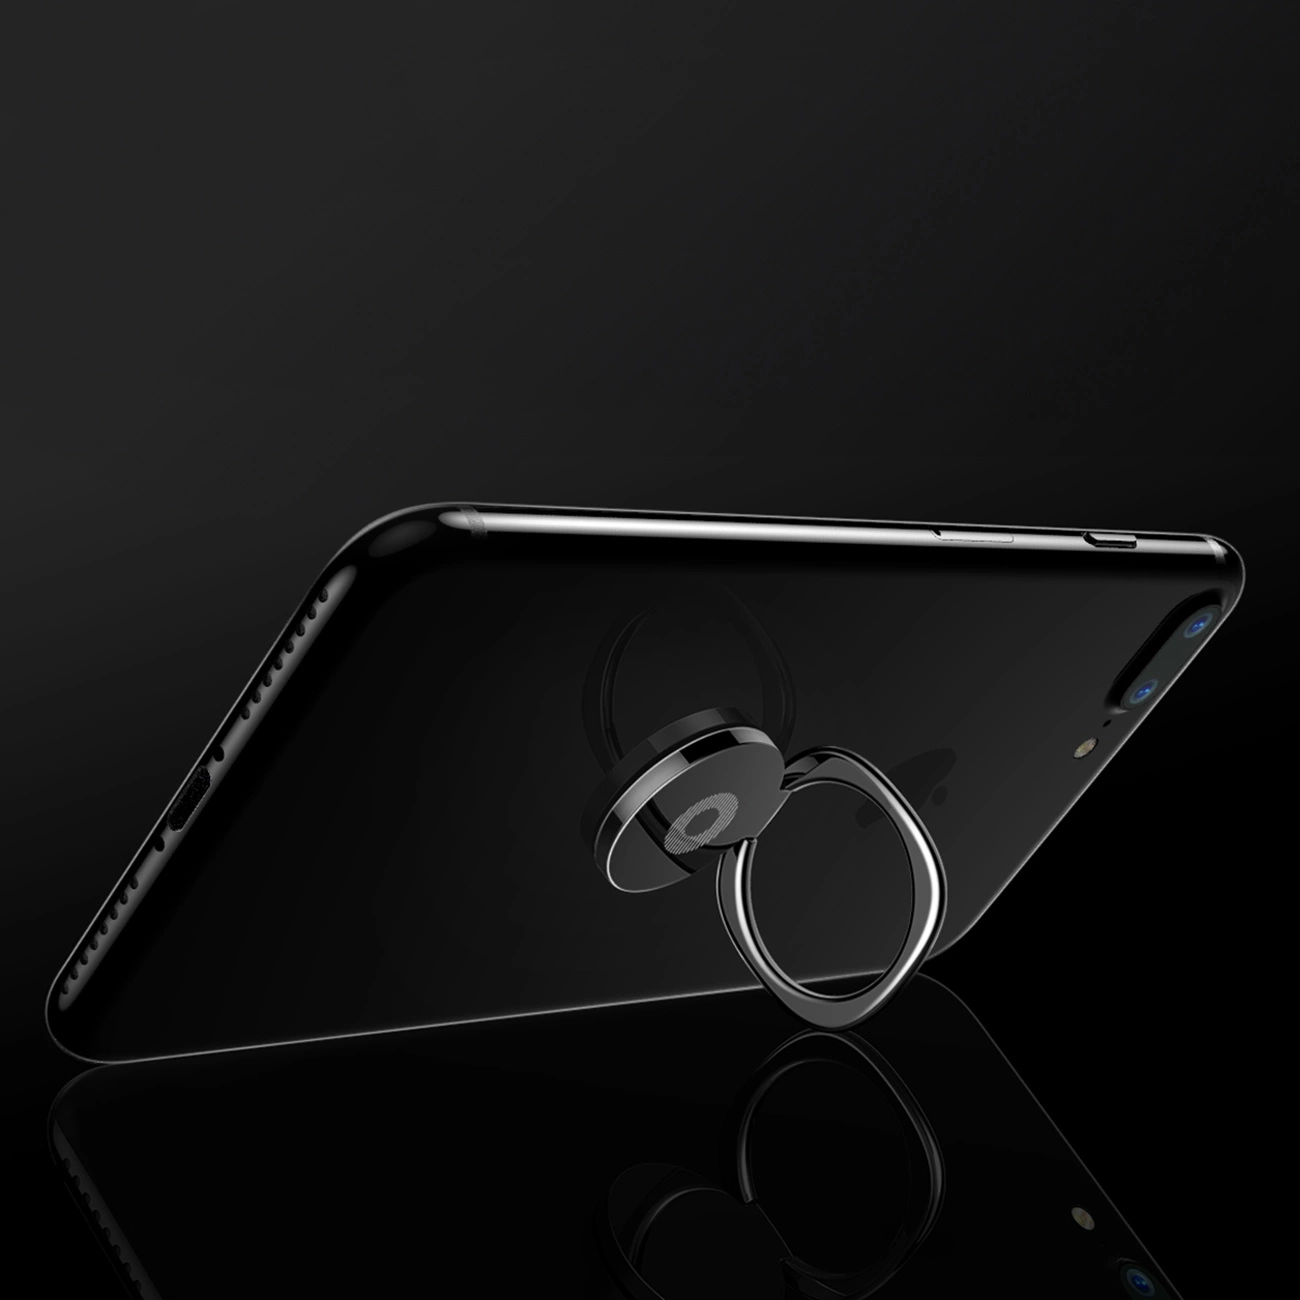 An unfolded Baseus Privity Ring holder with an attached phone leaning on a glass floor on a black background